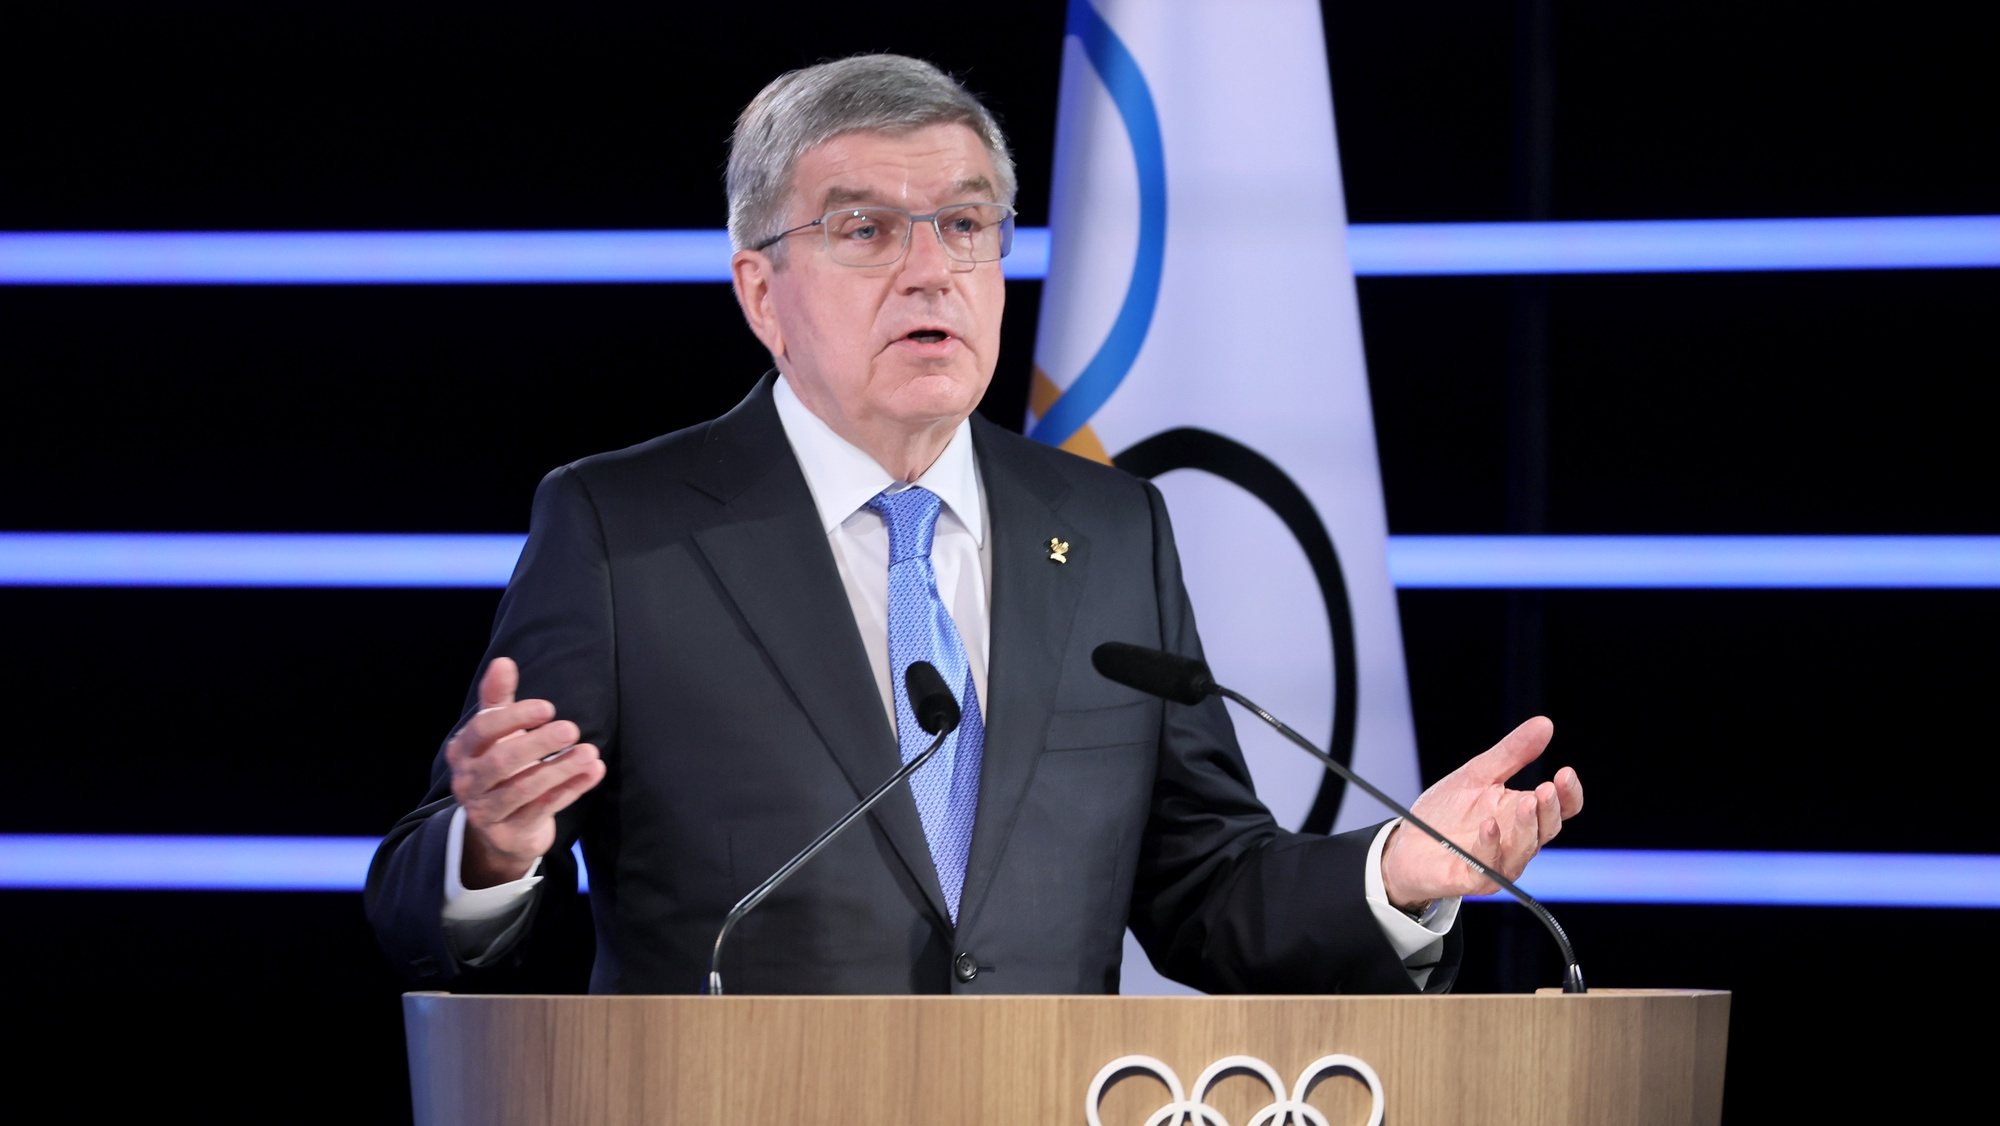 epa09960024 International Olympic Committee (IOC) President Thomas Bach attends the final day of the 139th IOC Session at Olympic House in Lausanne, Switzerland, 20 May 2022.  EPA/DENIS BALIBOUSE / POOL